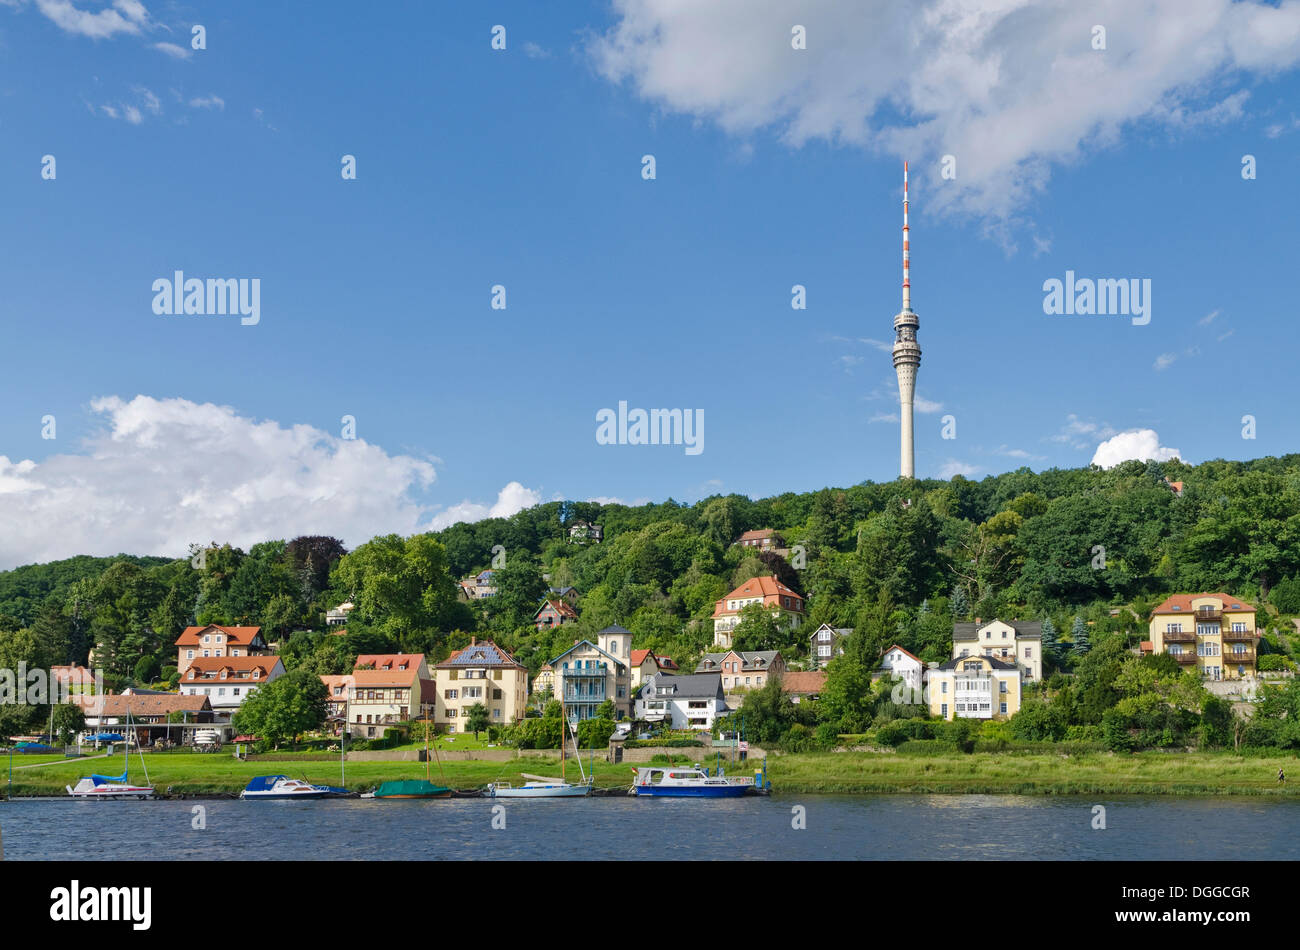 The Dresden TV tower seen across the river Elbe, Dresden, Saxony Stock Photo